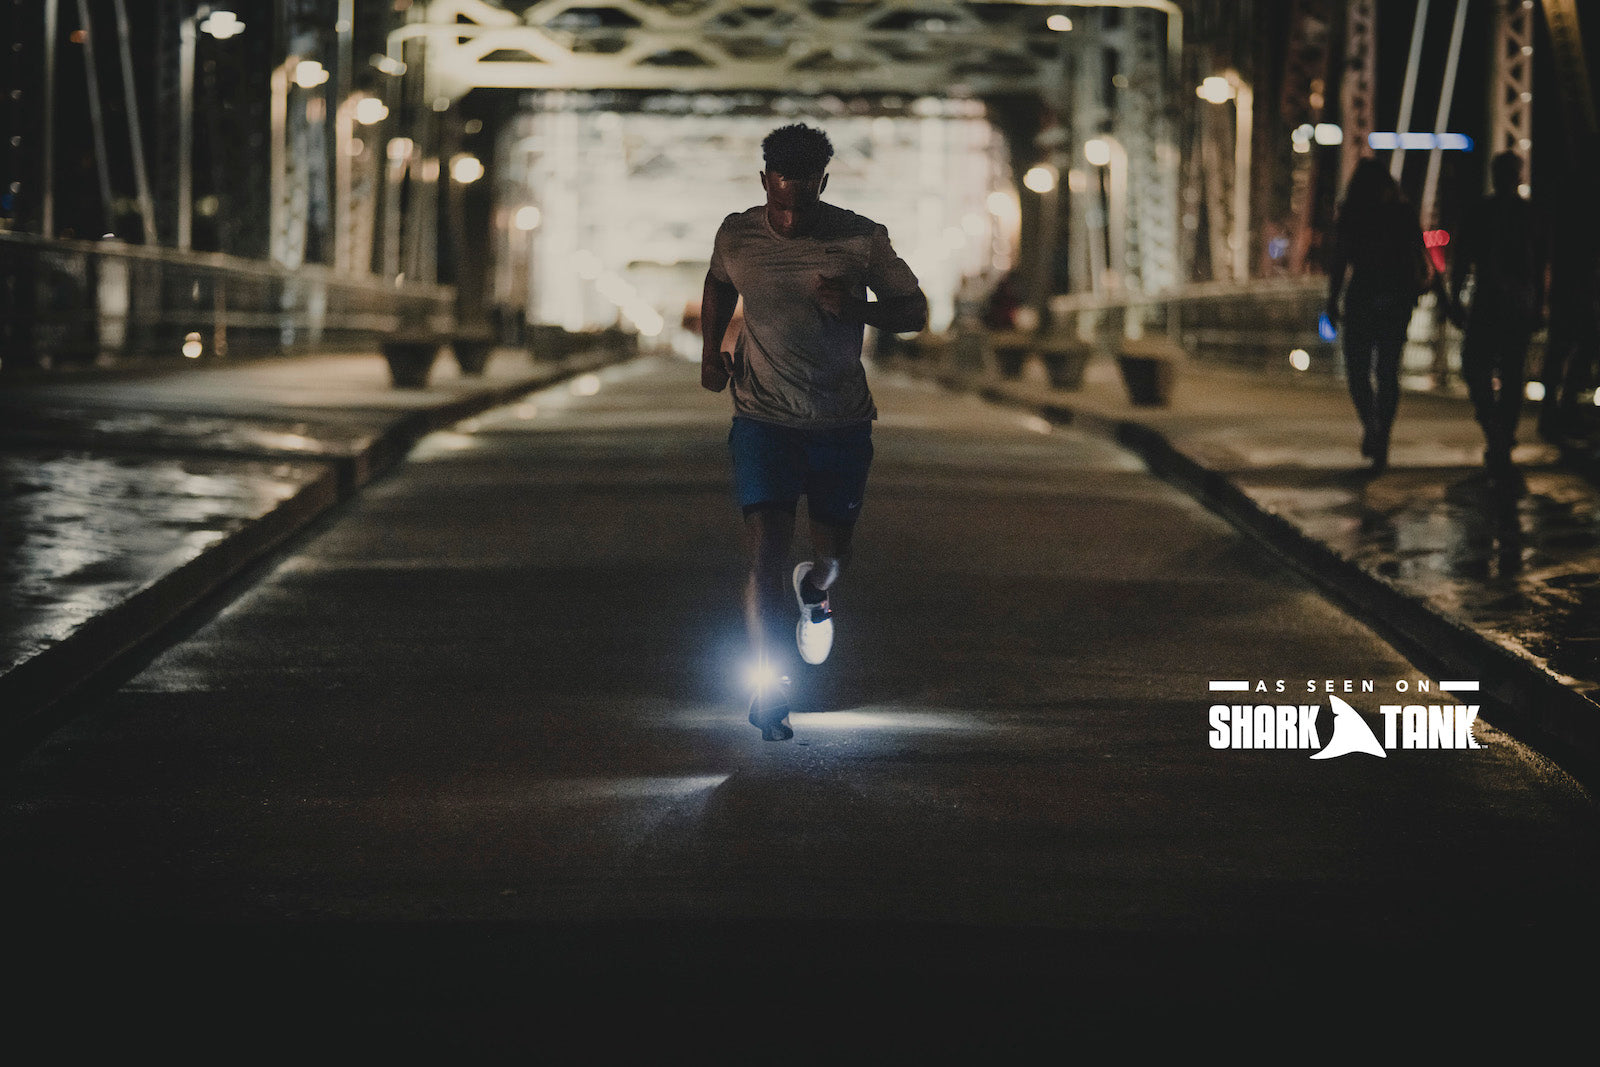 Night Tech Gear, Safety lights for runners, walkers and adventurers